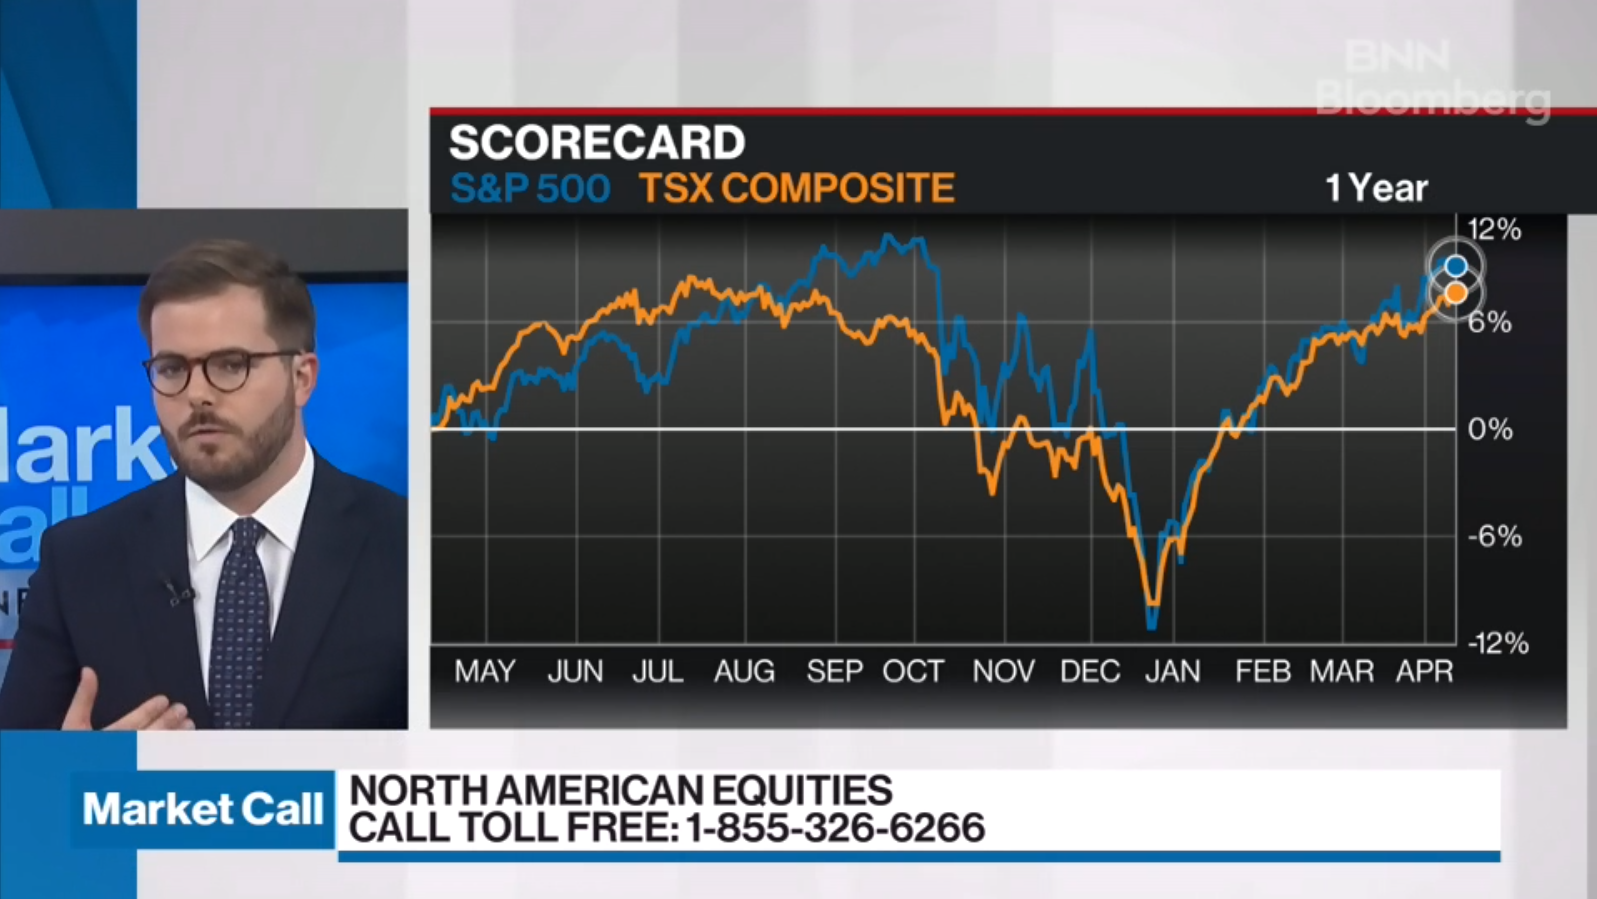 A screenshot of Market Call showing a man discussing a graph of stock info